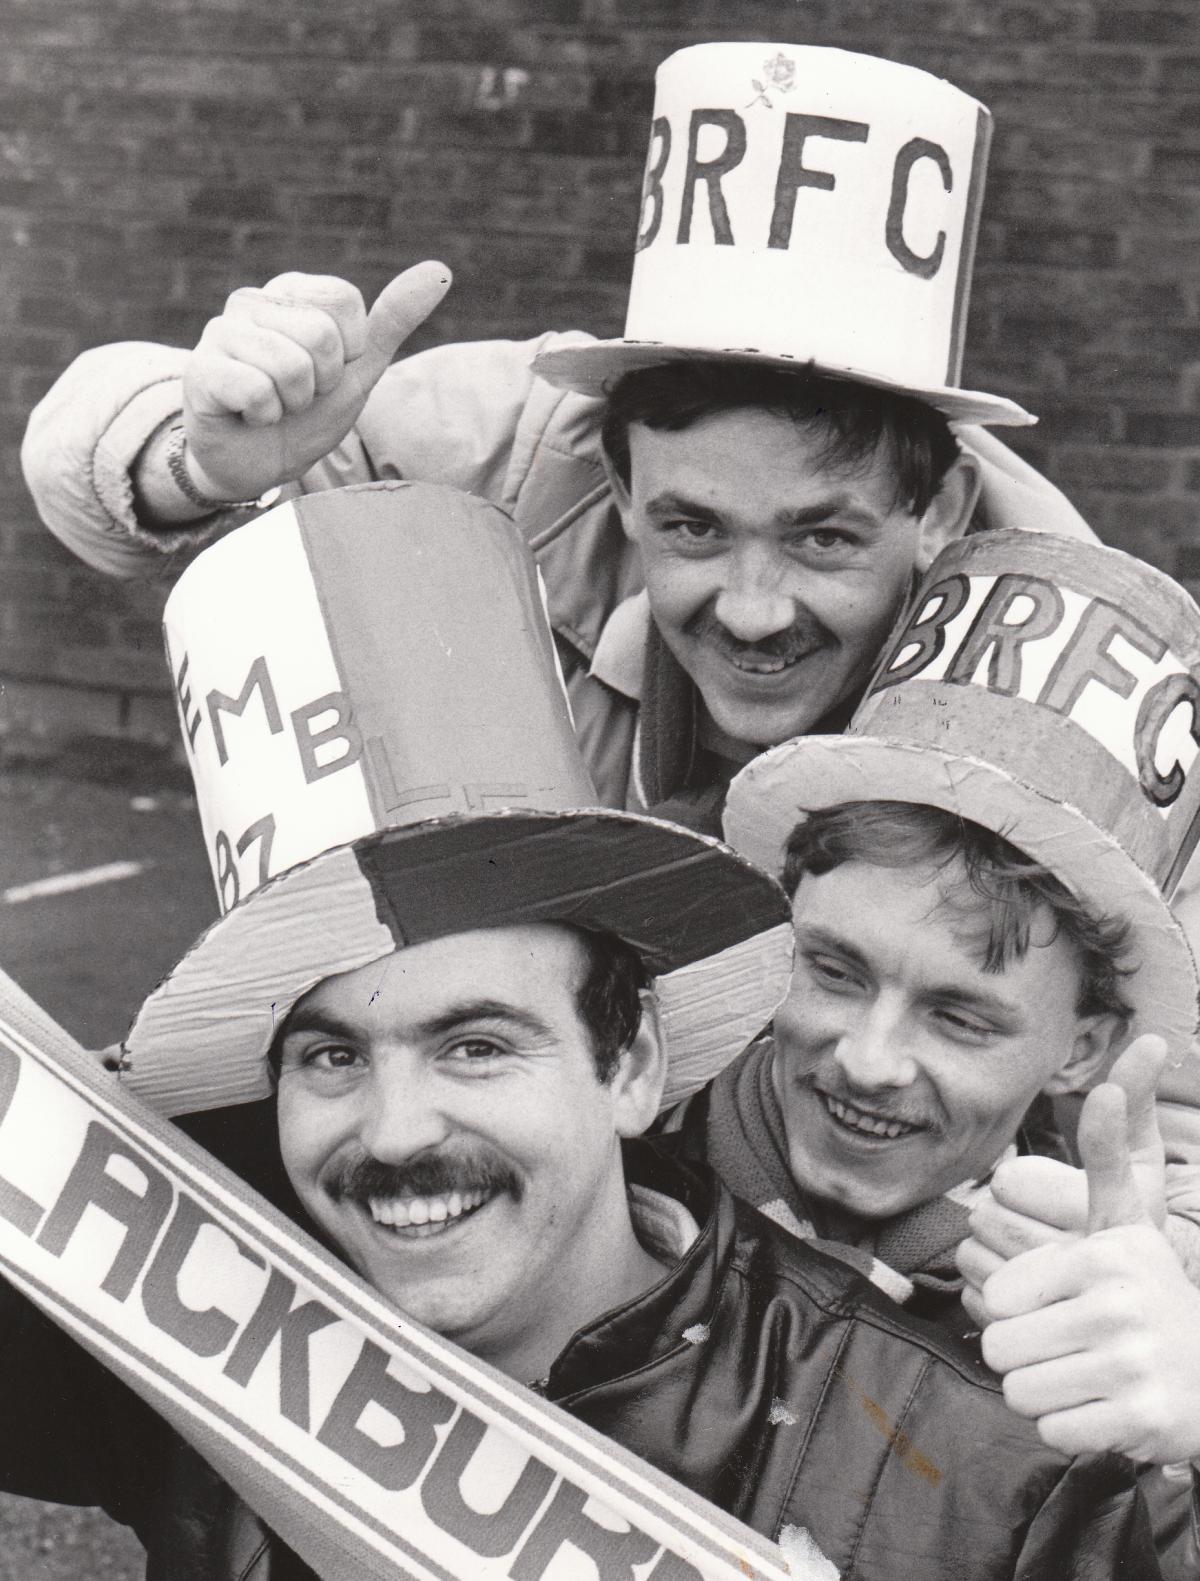 Dave Austin, Mick Walton and Lozx Calvert from the Rovers Return pub in 1987.